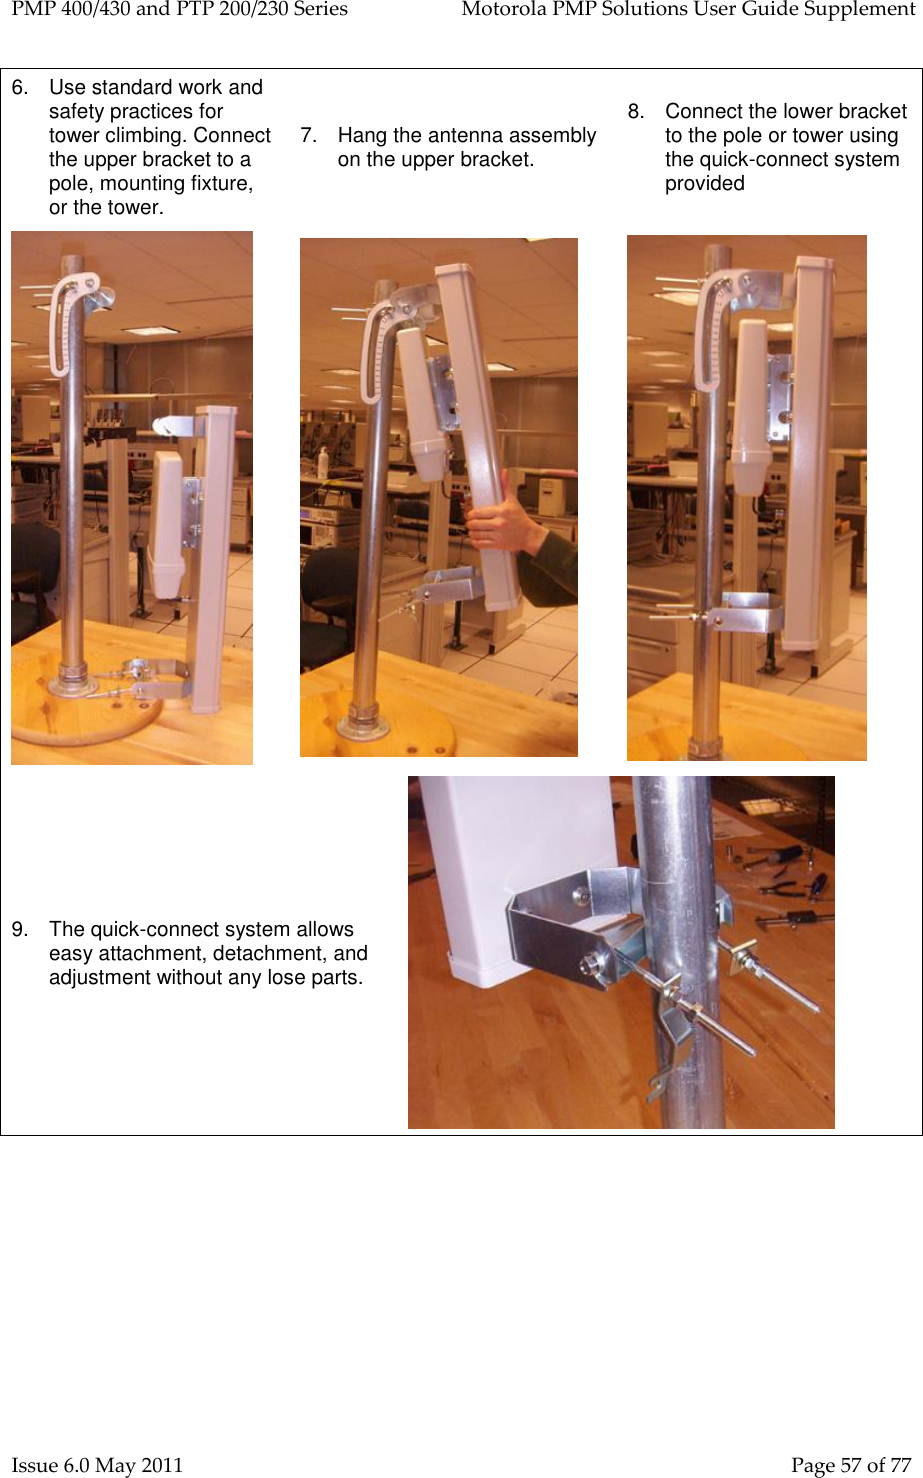 PMP 400/430 and PTP 200/230 Series   Motorola PMP Solutions User Guide Supplement Issue 6.0 May 2011    Page 57 of 77 6.  Use standard work and safety practices for tower climbing. Connect the upper bracket to a pole, mounting fixture, or the tower. 7.  Hang the antenna assembly on the upper bracket. 8.  Connect the lower bracket to the pole or tower using the quick-connect system provided    9.  The quick-connect system allows easy attachment, detachment, and adjustment without any lose parts.  